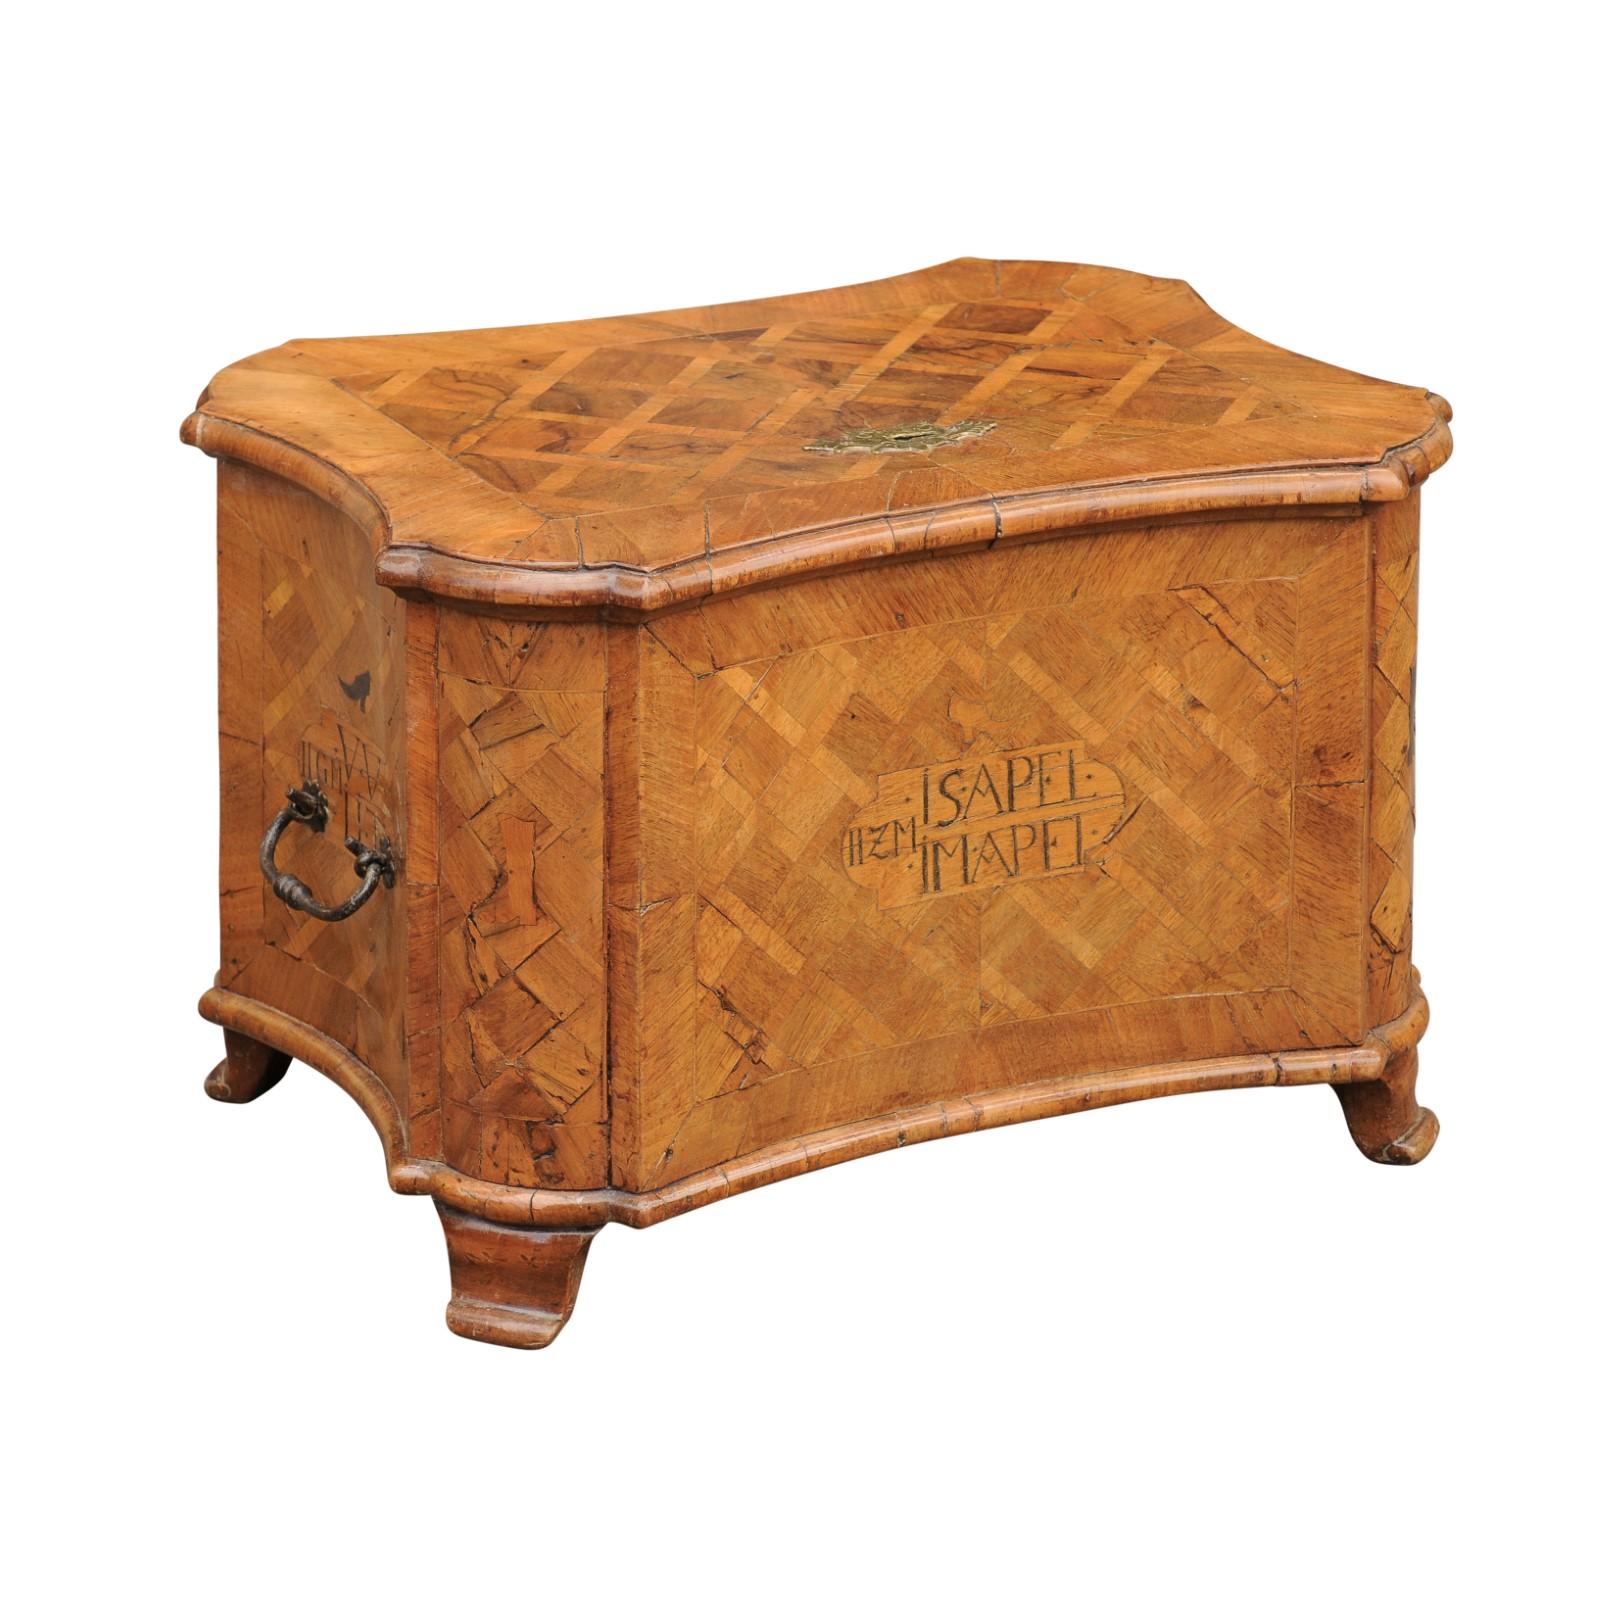 18th Century Walnut Box with Marquetry Décor and Inlaid Motifs on Scrolling Feet